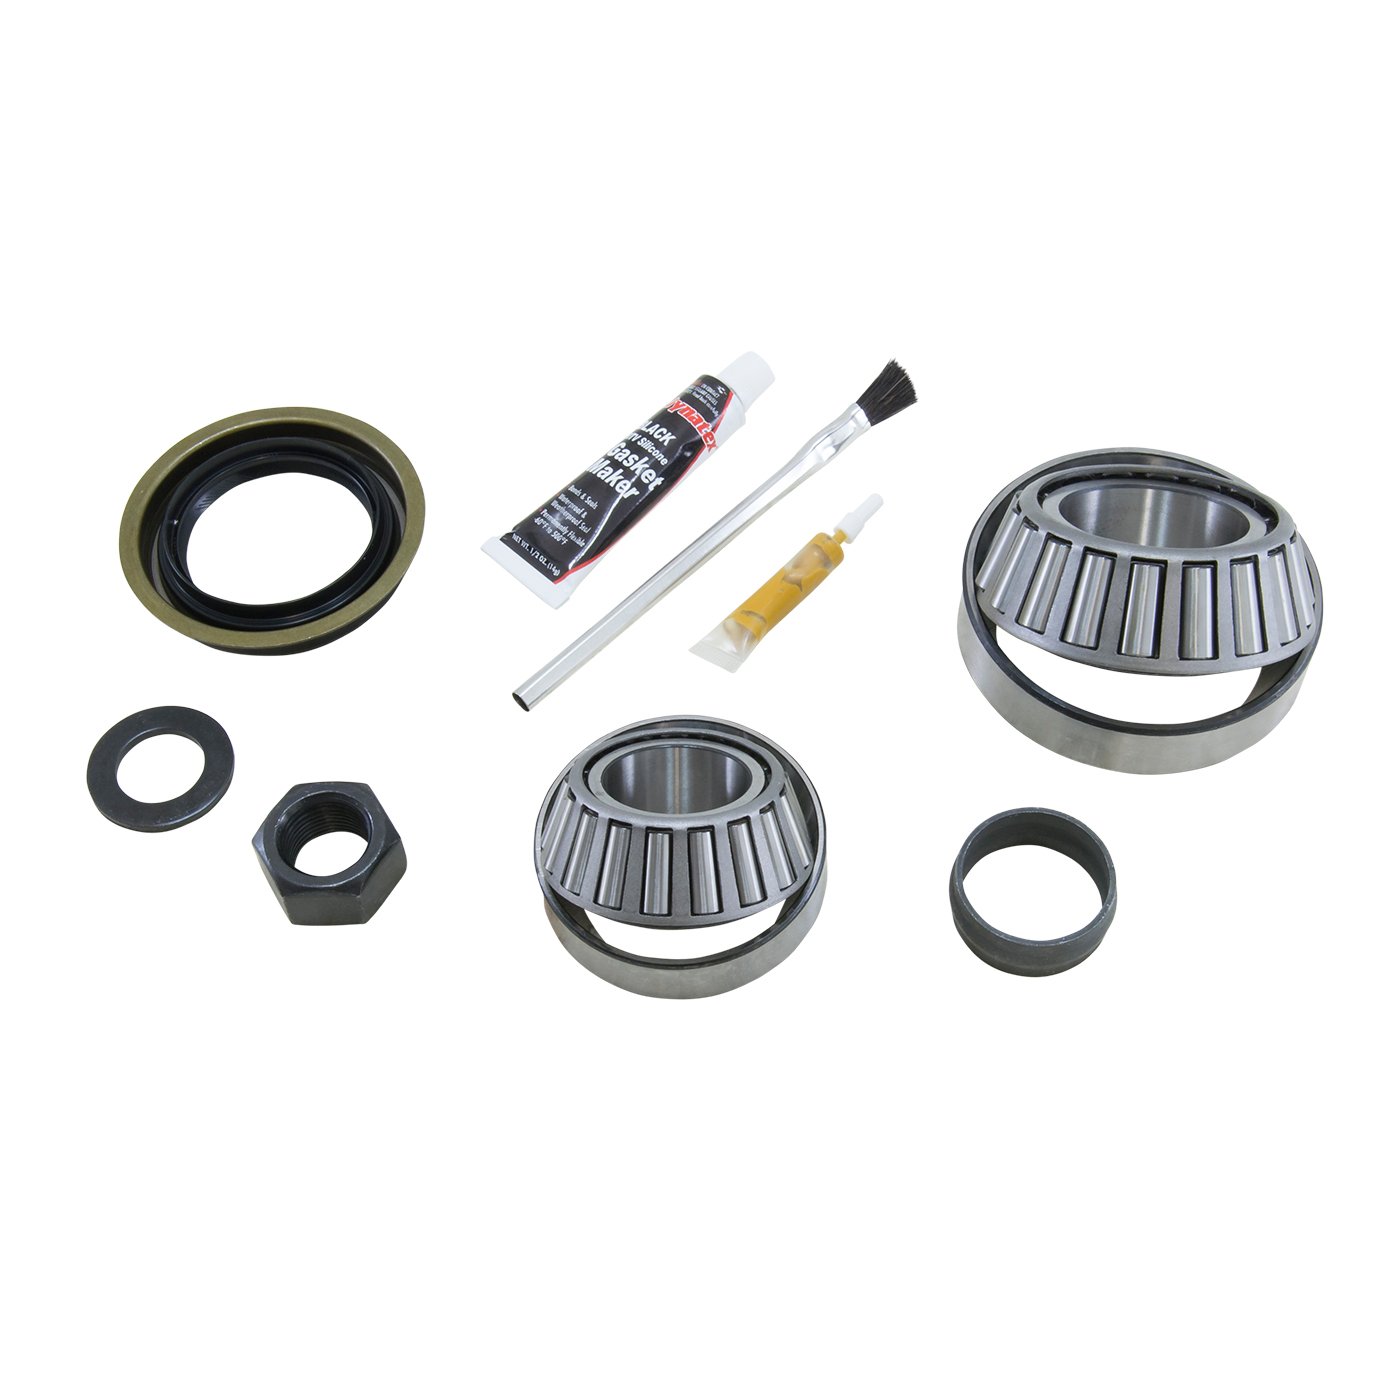 Bearing Install Kit For '03 And Newer Chrysler 9.25 in. Diff For Dodge Truck